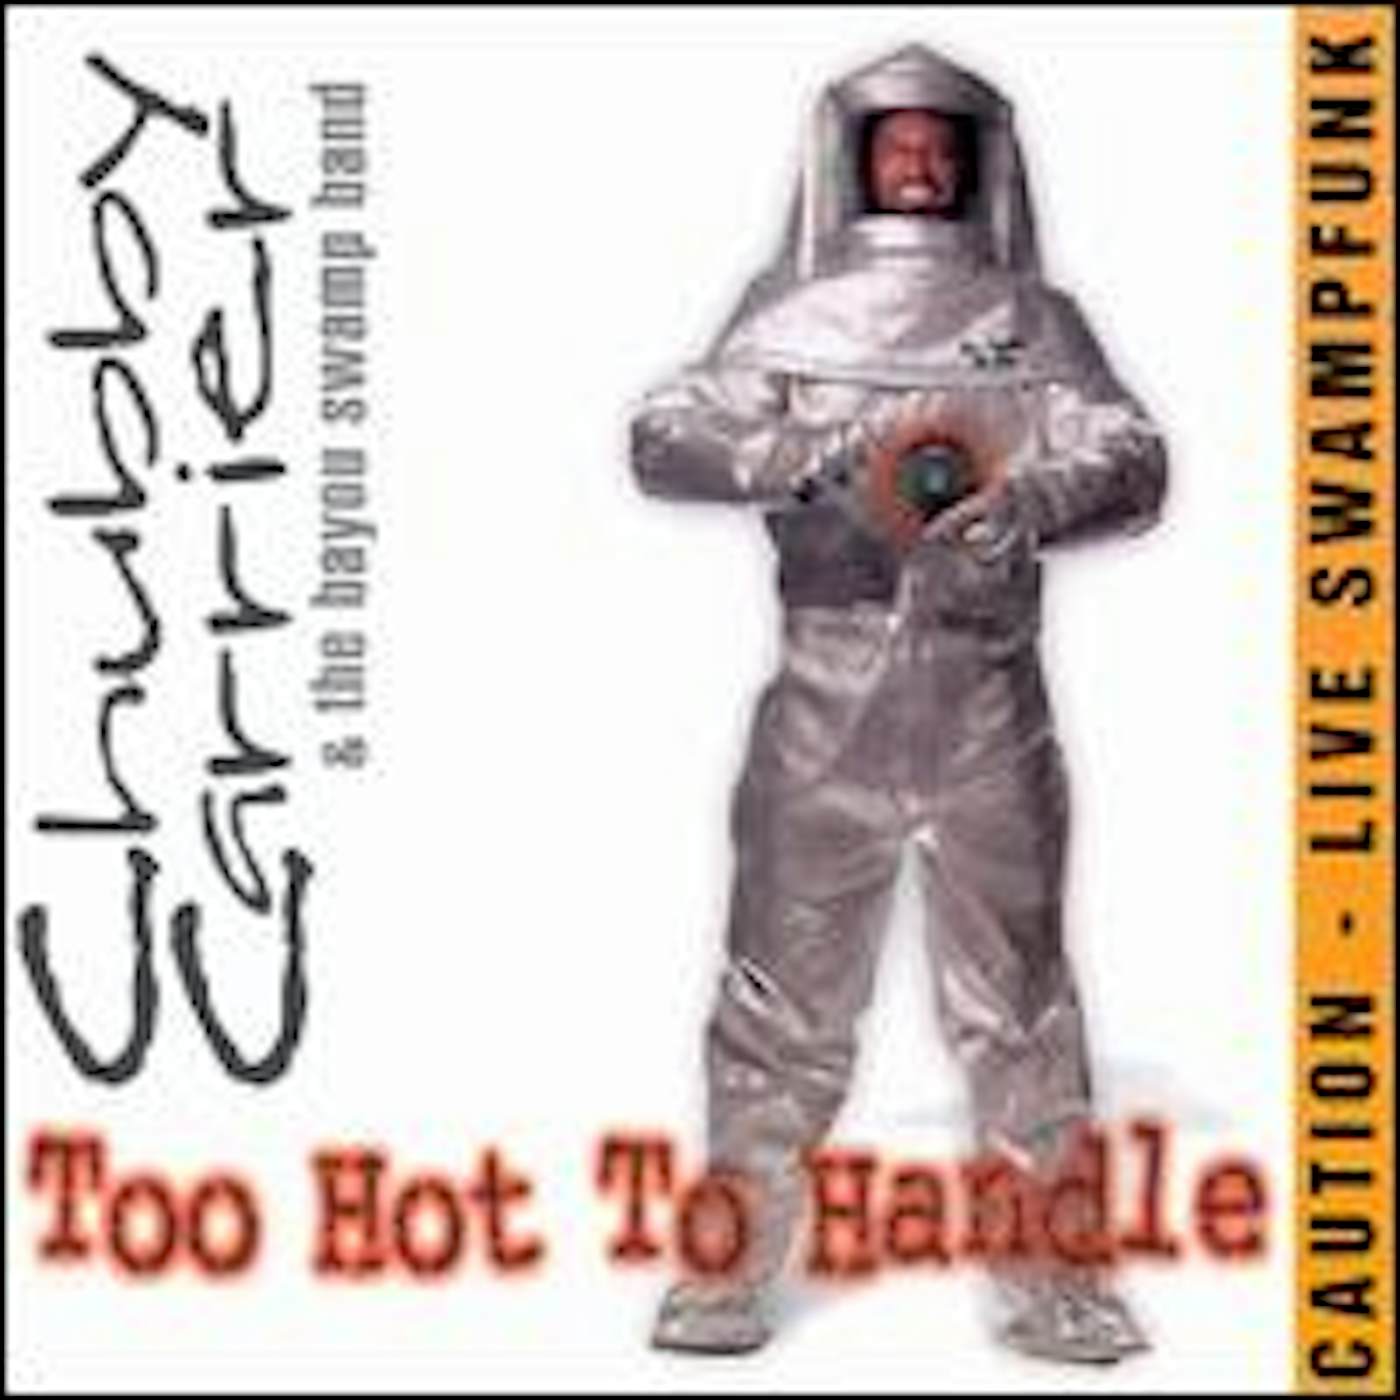 Chubby Carrier TOO HOT TO HANDLE CD